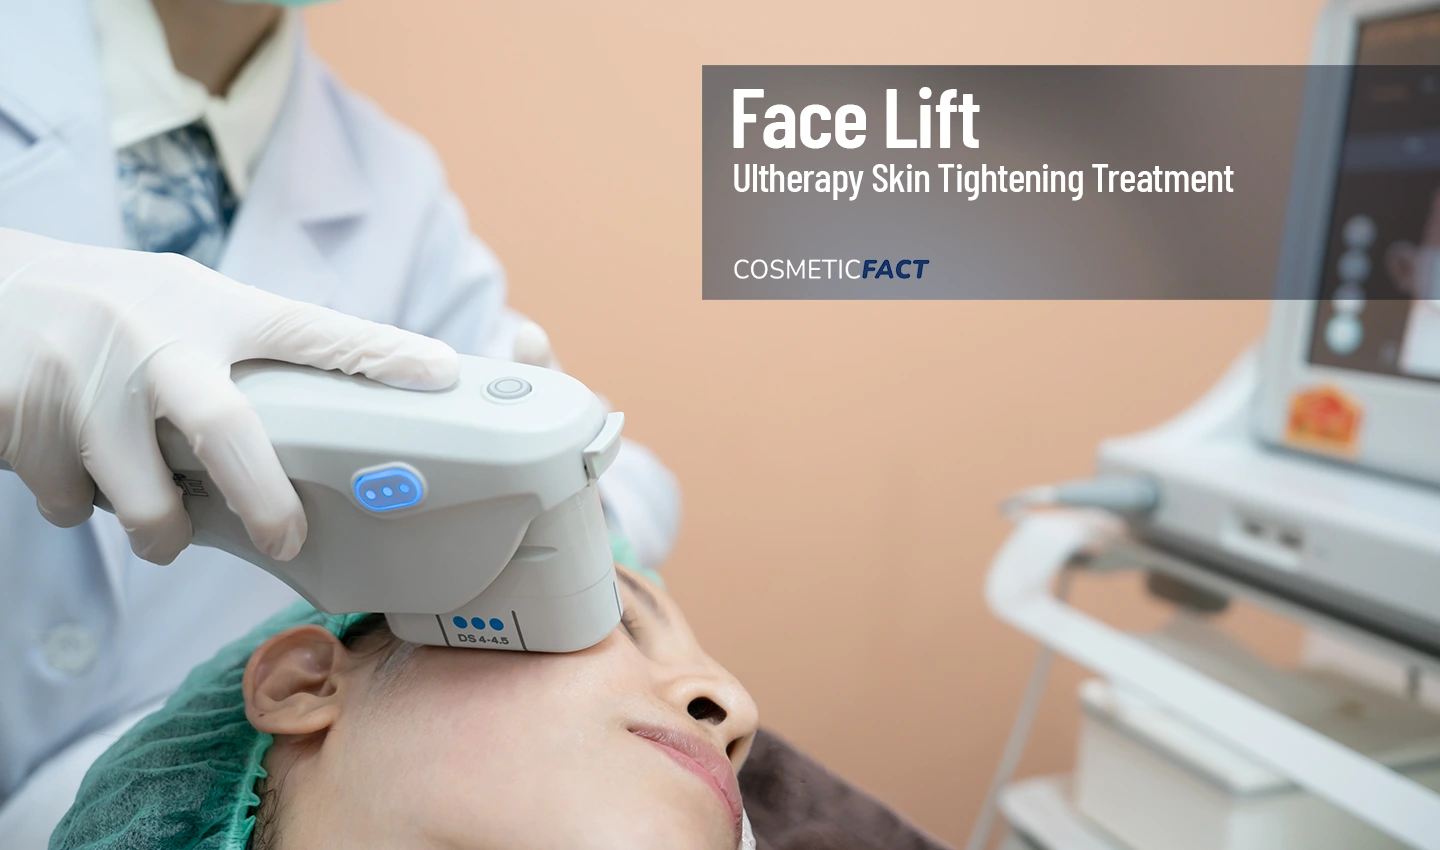 Woman receiving Ultherapy treatment on her face, with ultrasound technology being used to stimulate collagen production for lifted and tightened skin